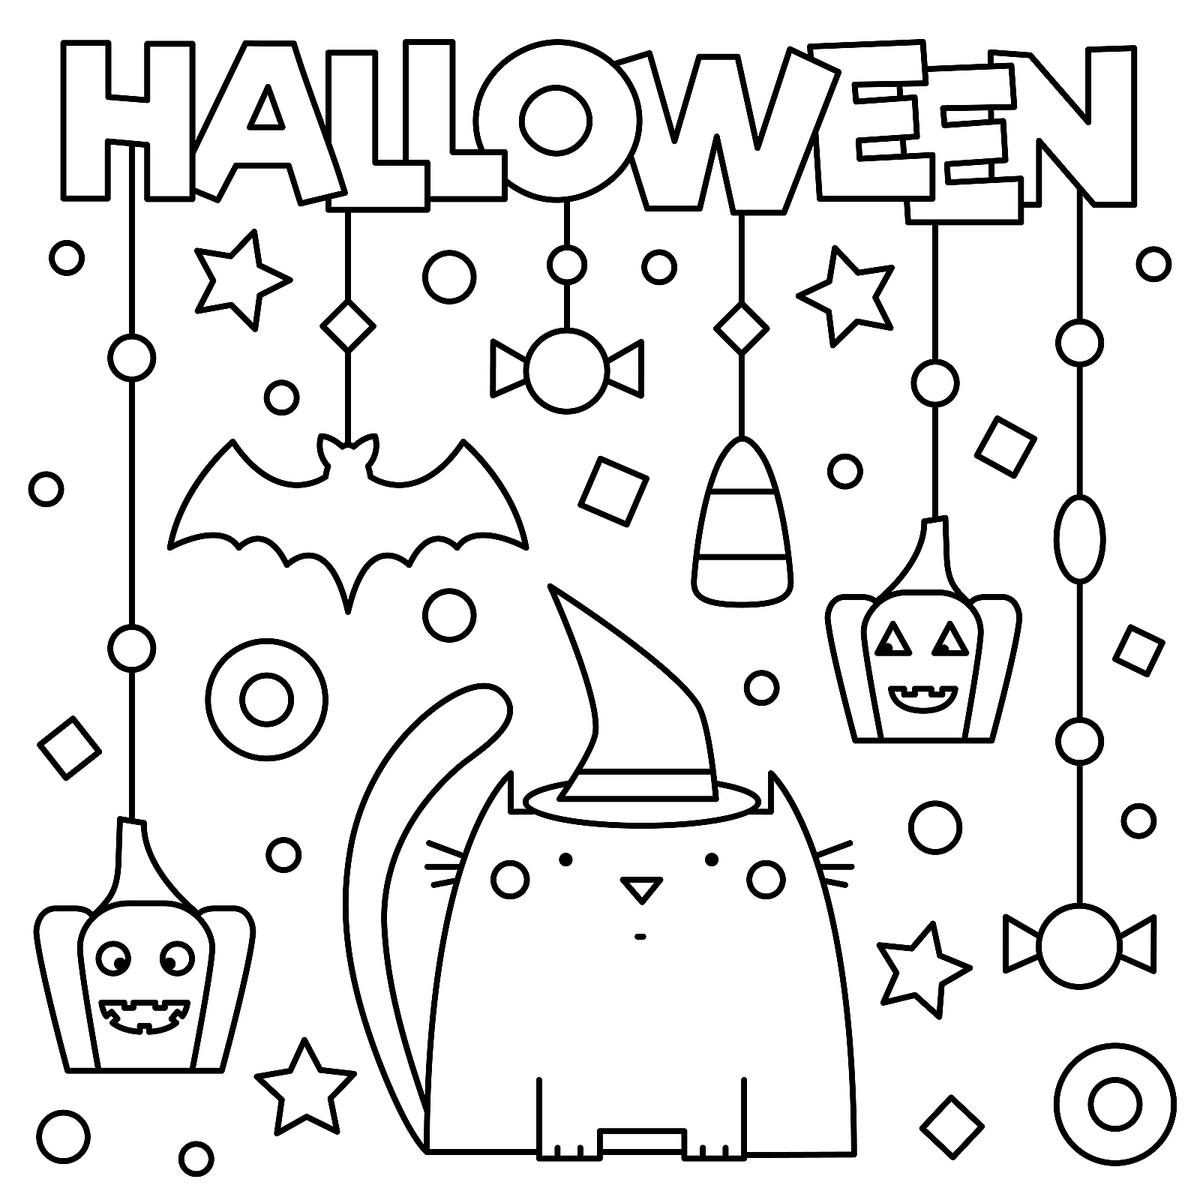 Halloween coloring pages free printable halloween activities for kids printables mom